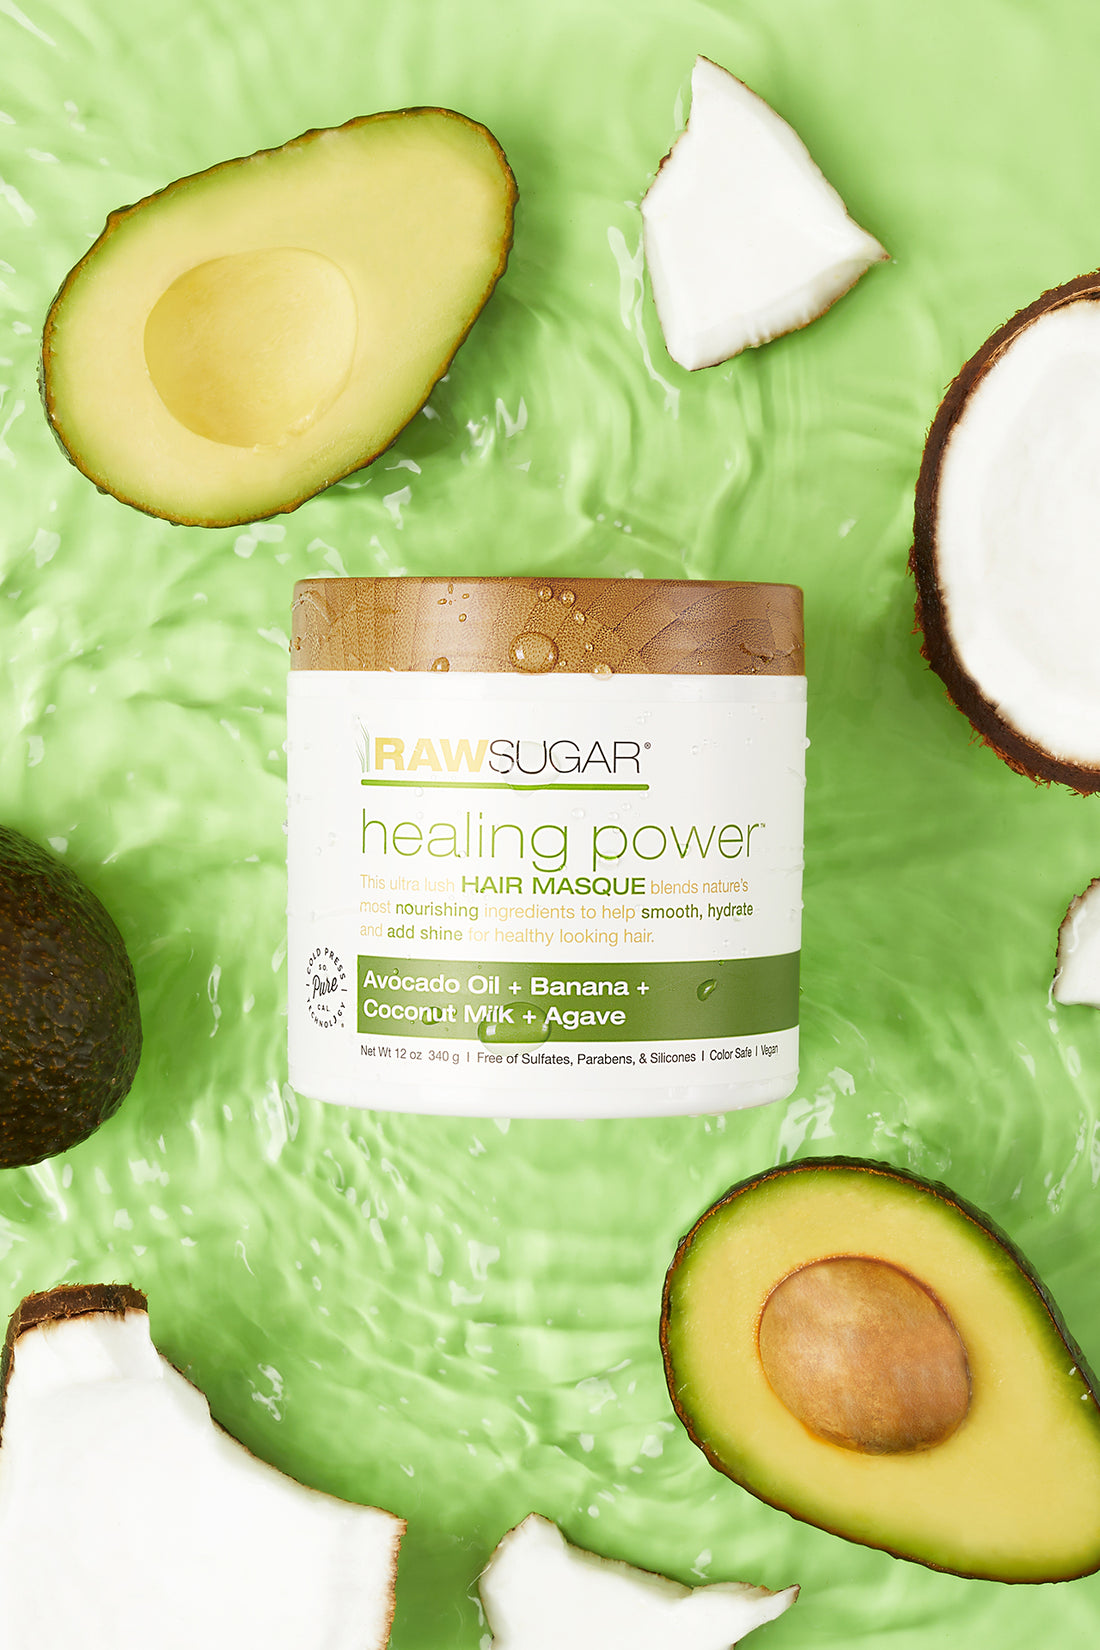 hair masque next to avocado slices and coconut